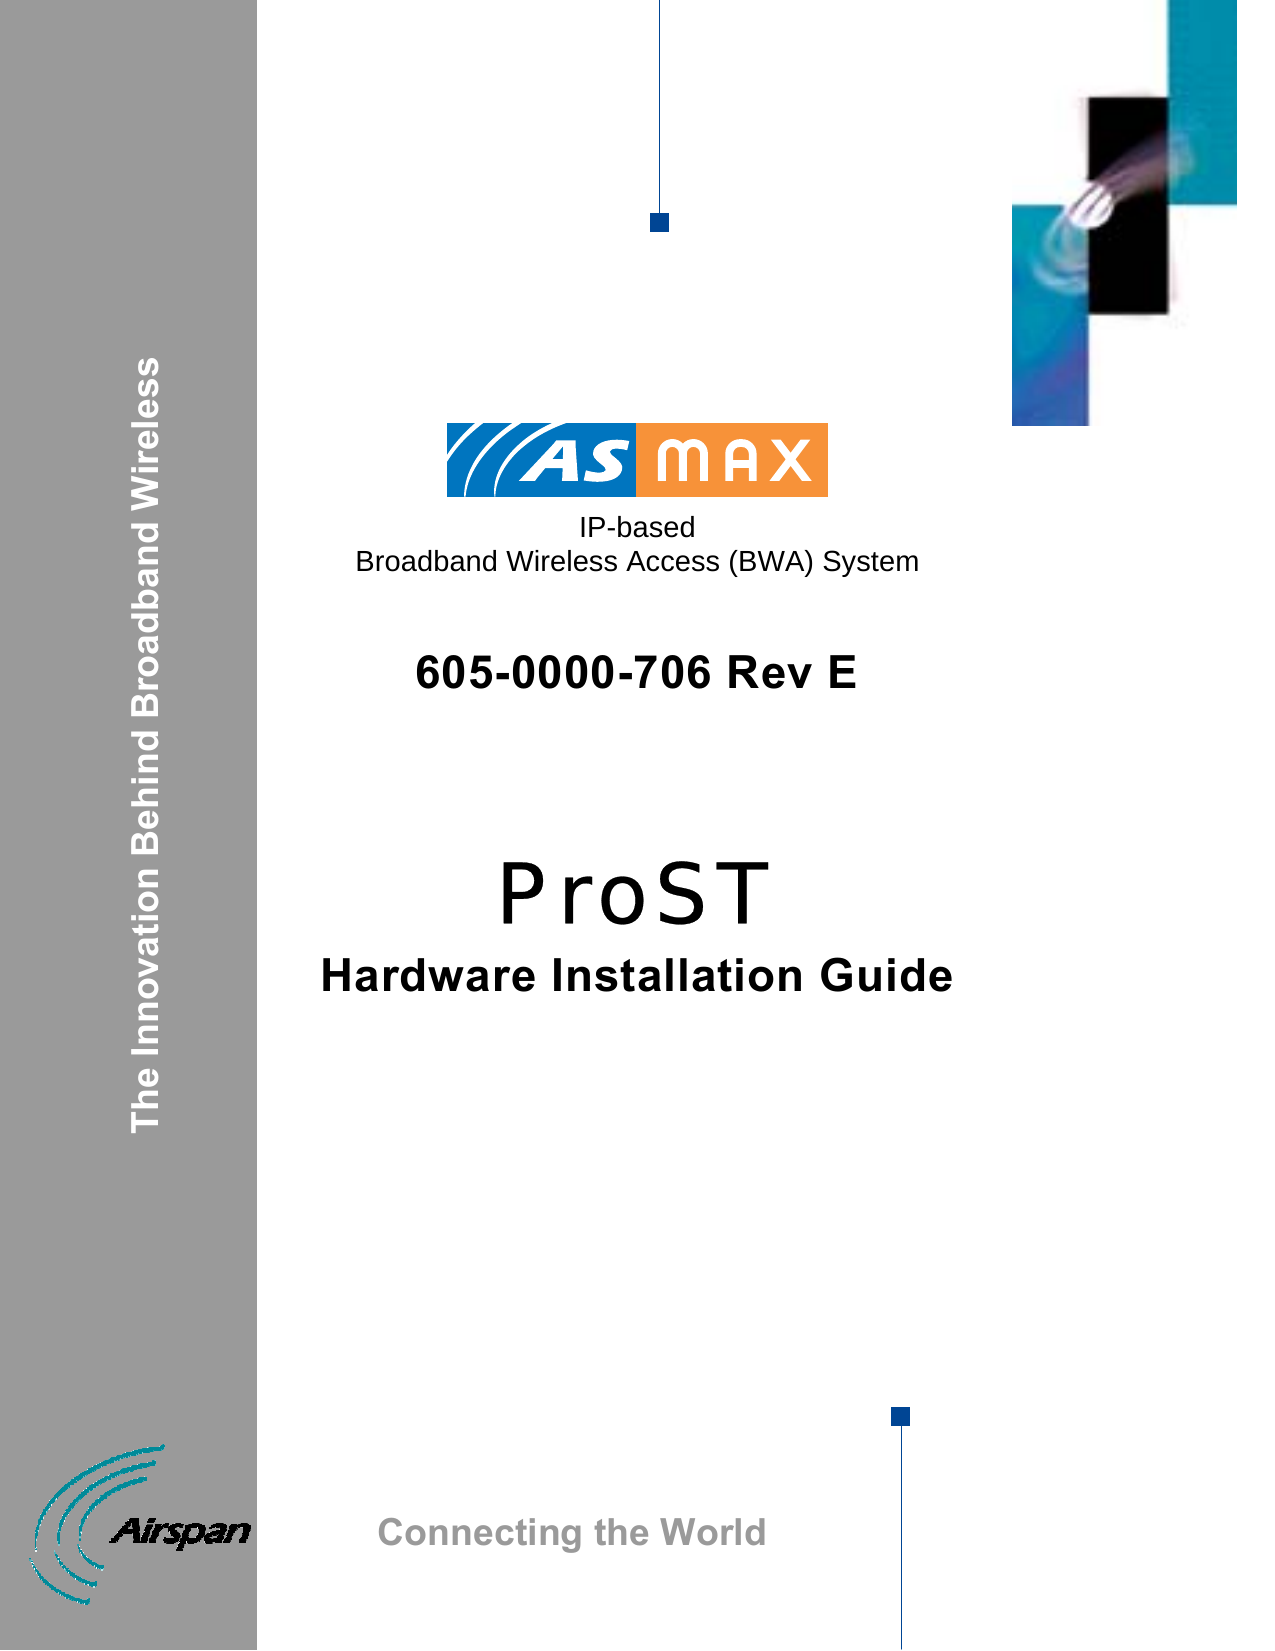           IP-based  Broadband Wireless Access (BWA) System   605-0000-706 Rev E    ProST Hardware Installation Guide                                       The Innovation Behind Broadband Wireless Connecting the World 